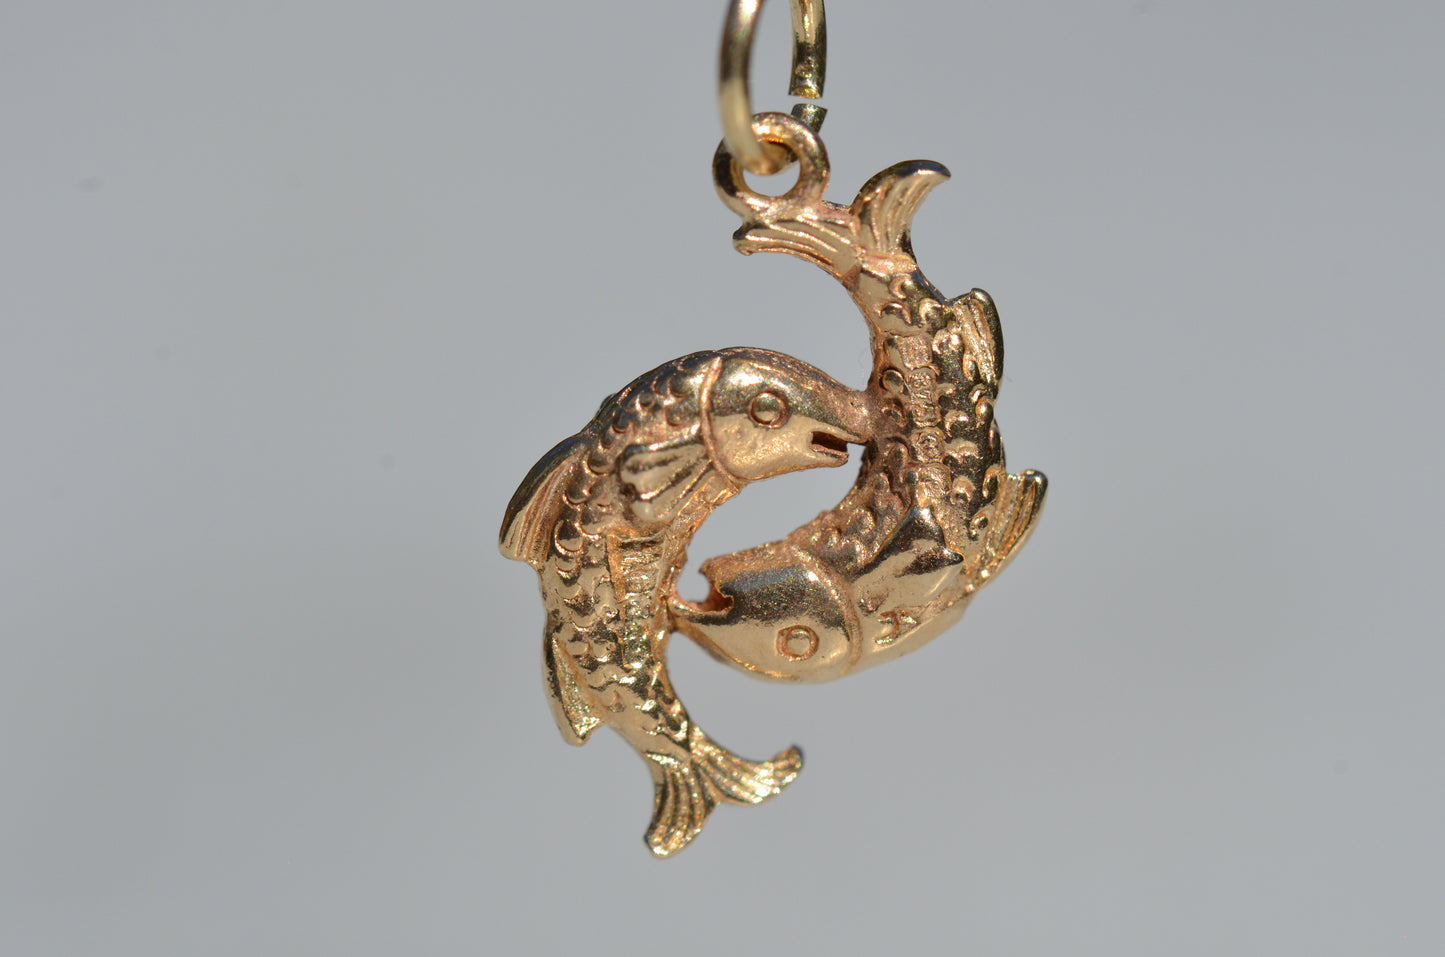 Entwined Vintage Pisces Charm